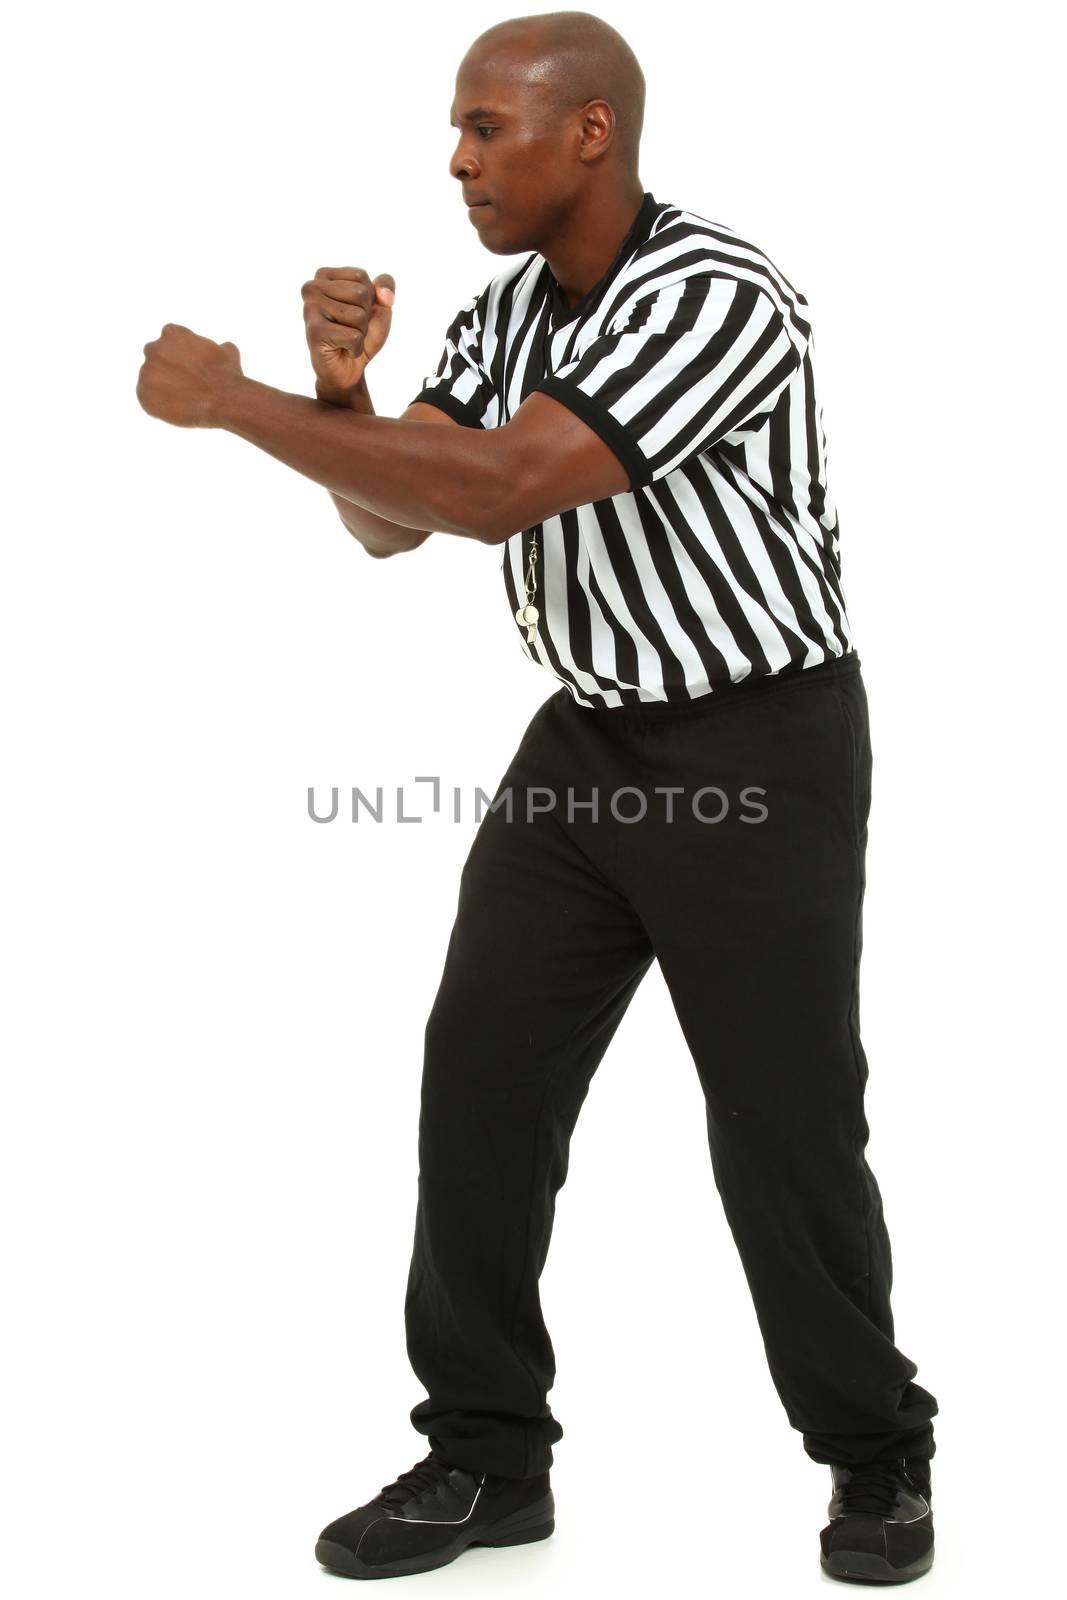 Attractive fit black man in referee uniform over white. by duplass